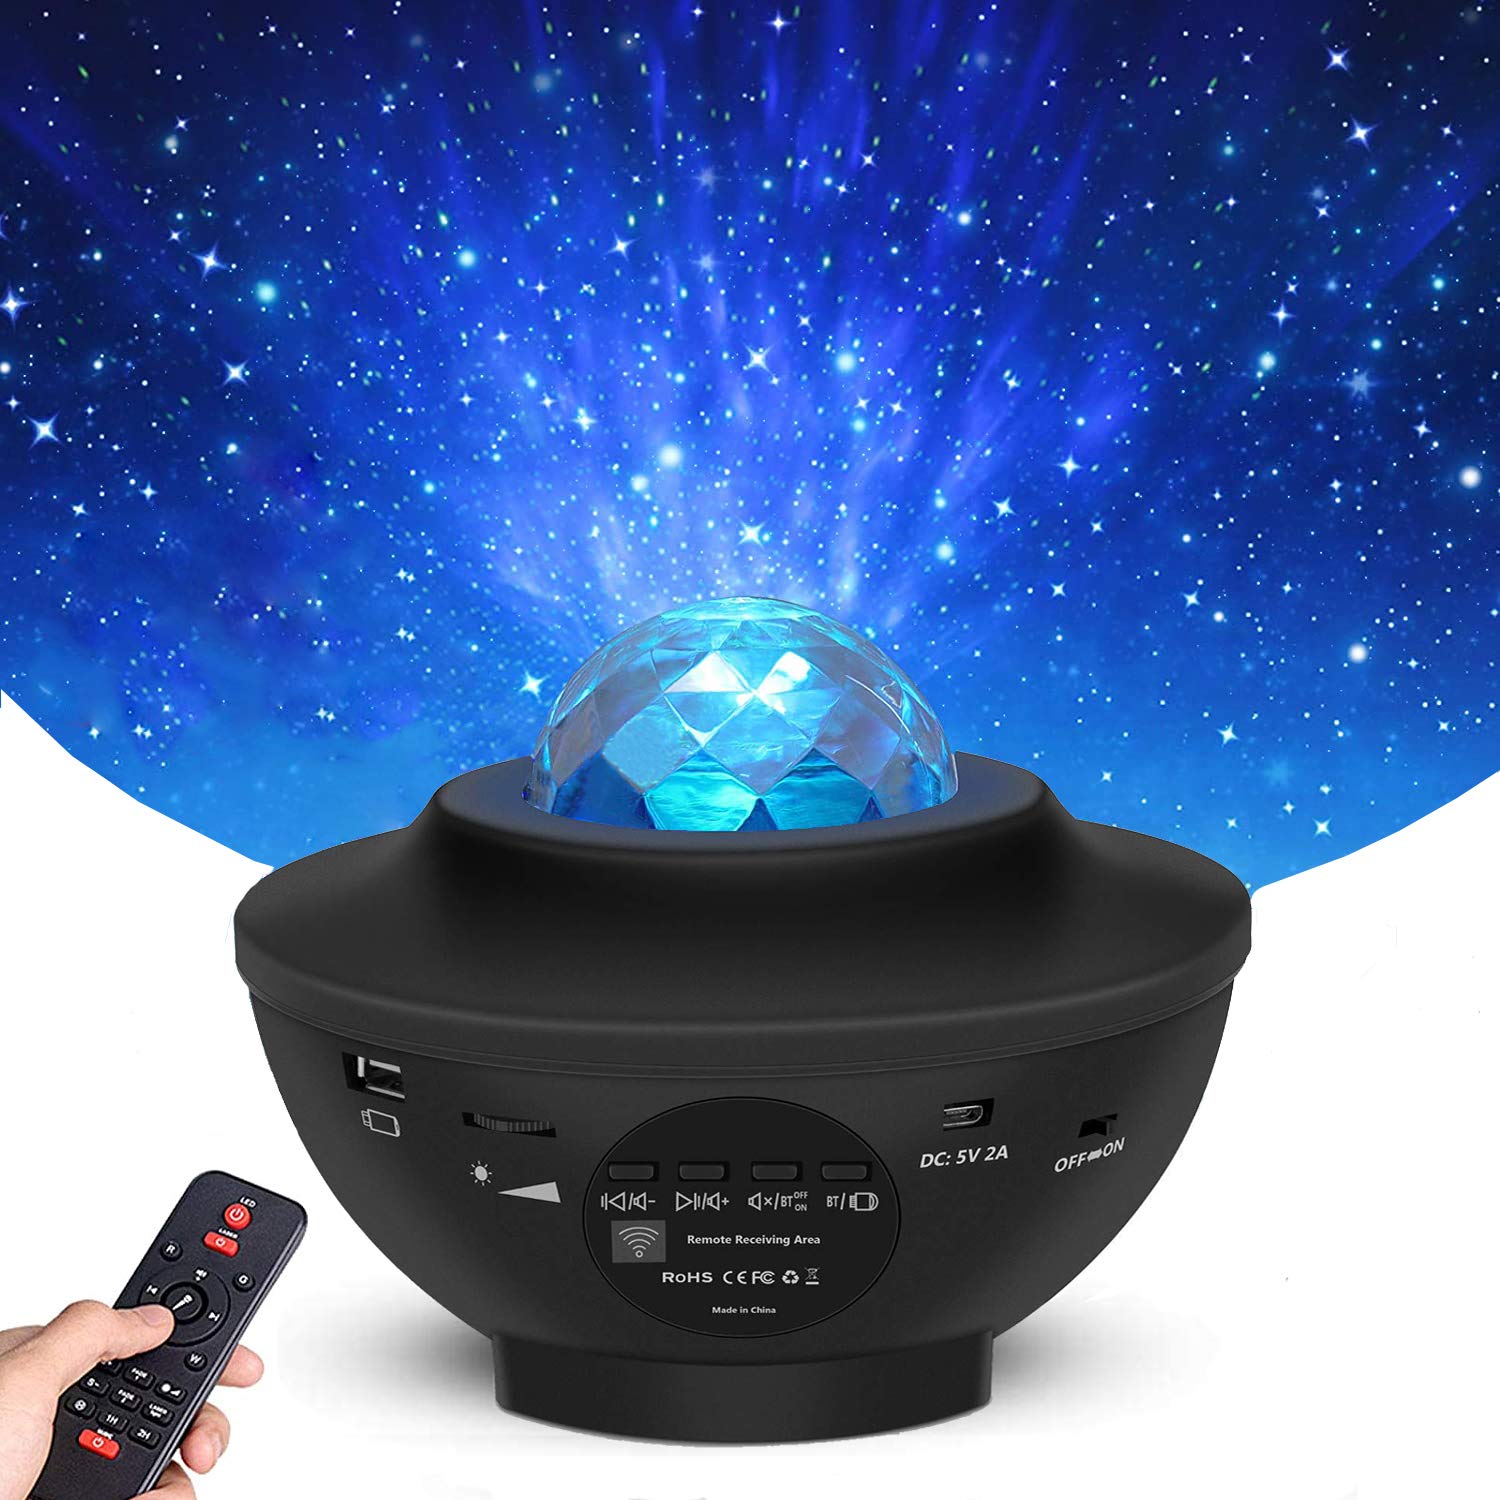 Star Projector Night Light, HFAN LED Ocean Wave Light Projector with Sound Sensor,Remote Control,360°Rotating Sleep Soothing Color Changing Lamp for Kids Stage Bedroom Wedding Christmas Room Party